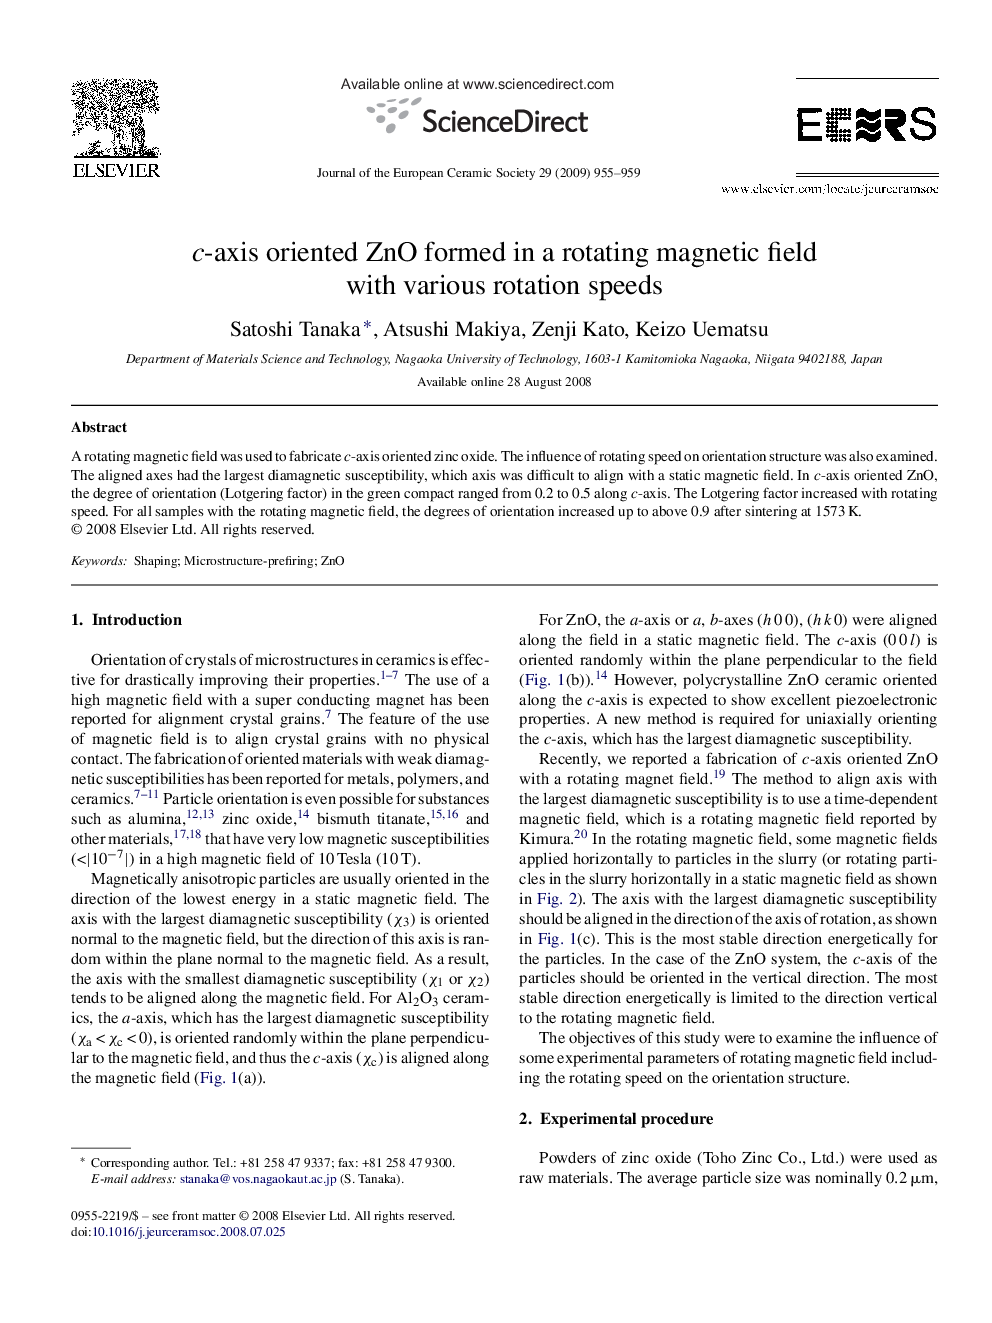 c-axis oriented ZnO formed in a rotating magnetic field with various rotation speeds